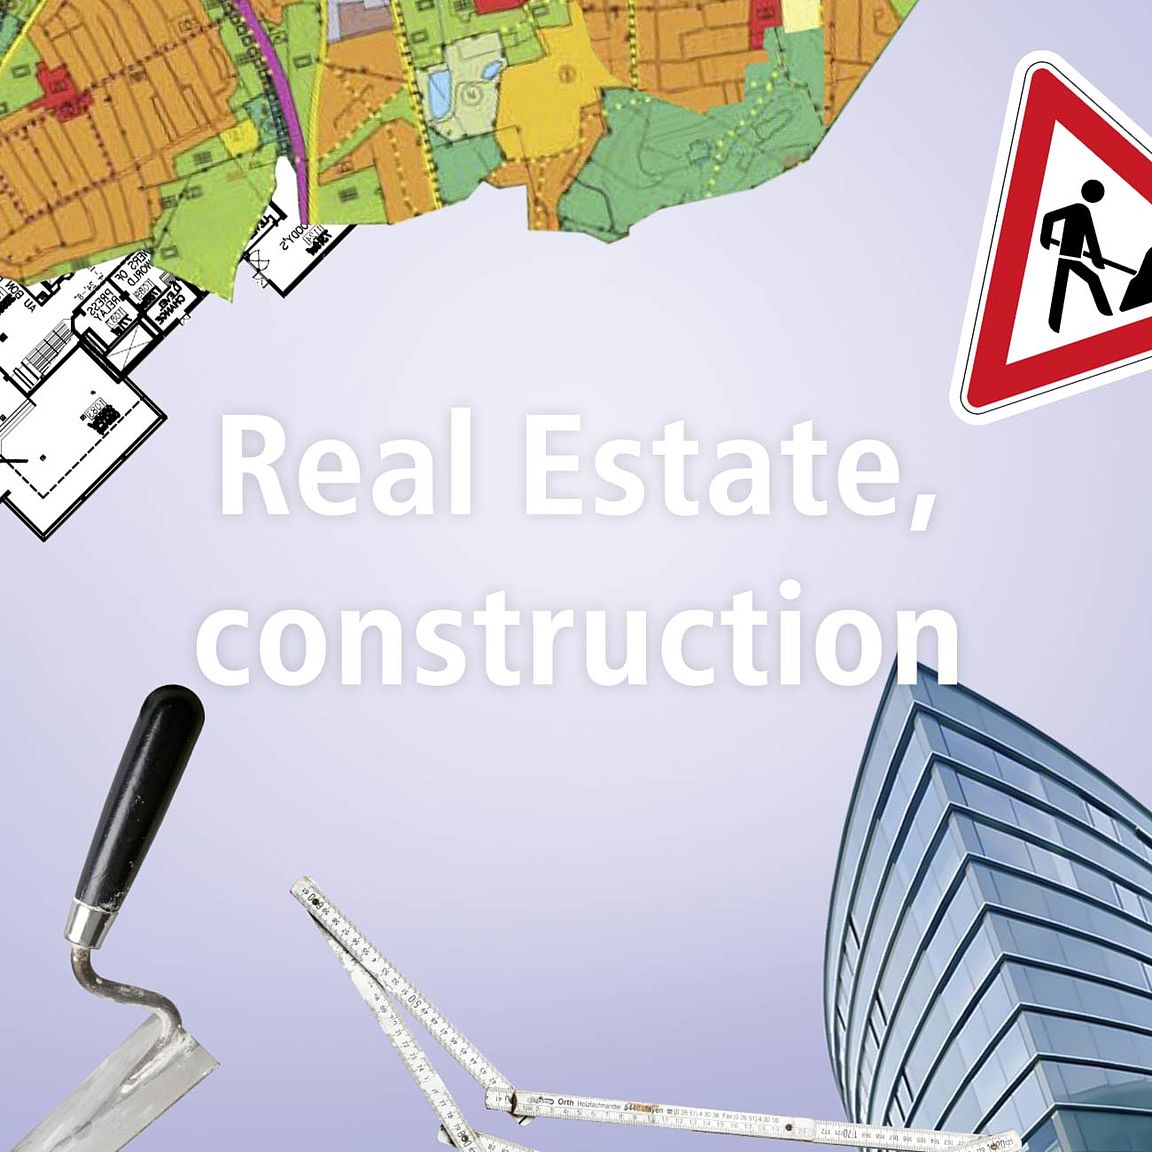 Real estate, construction